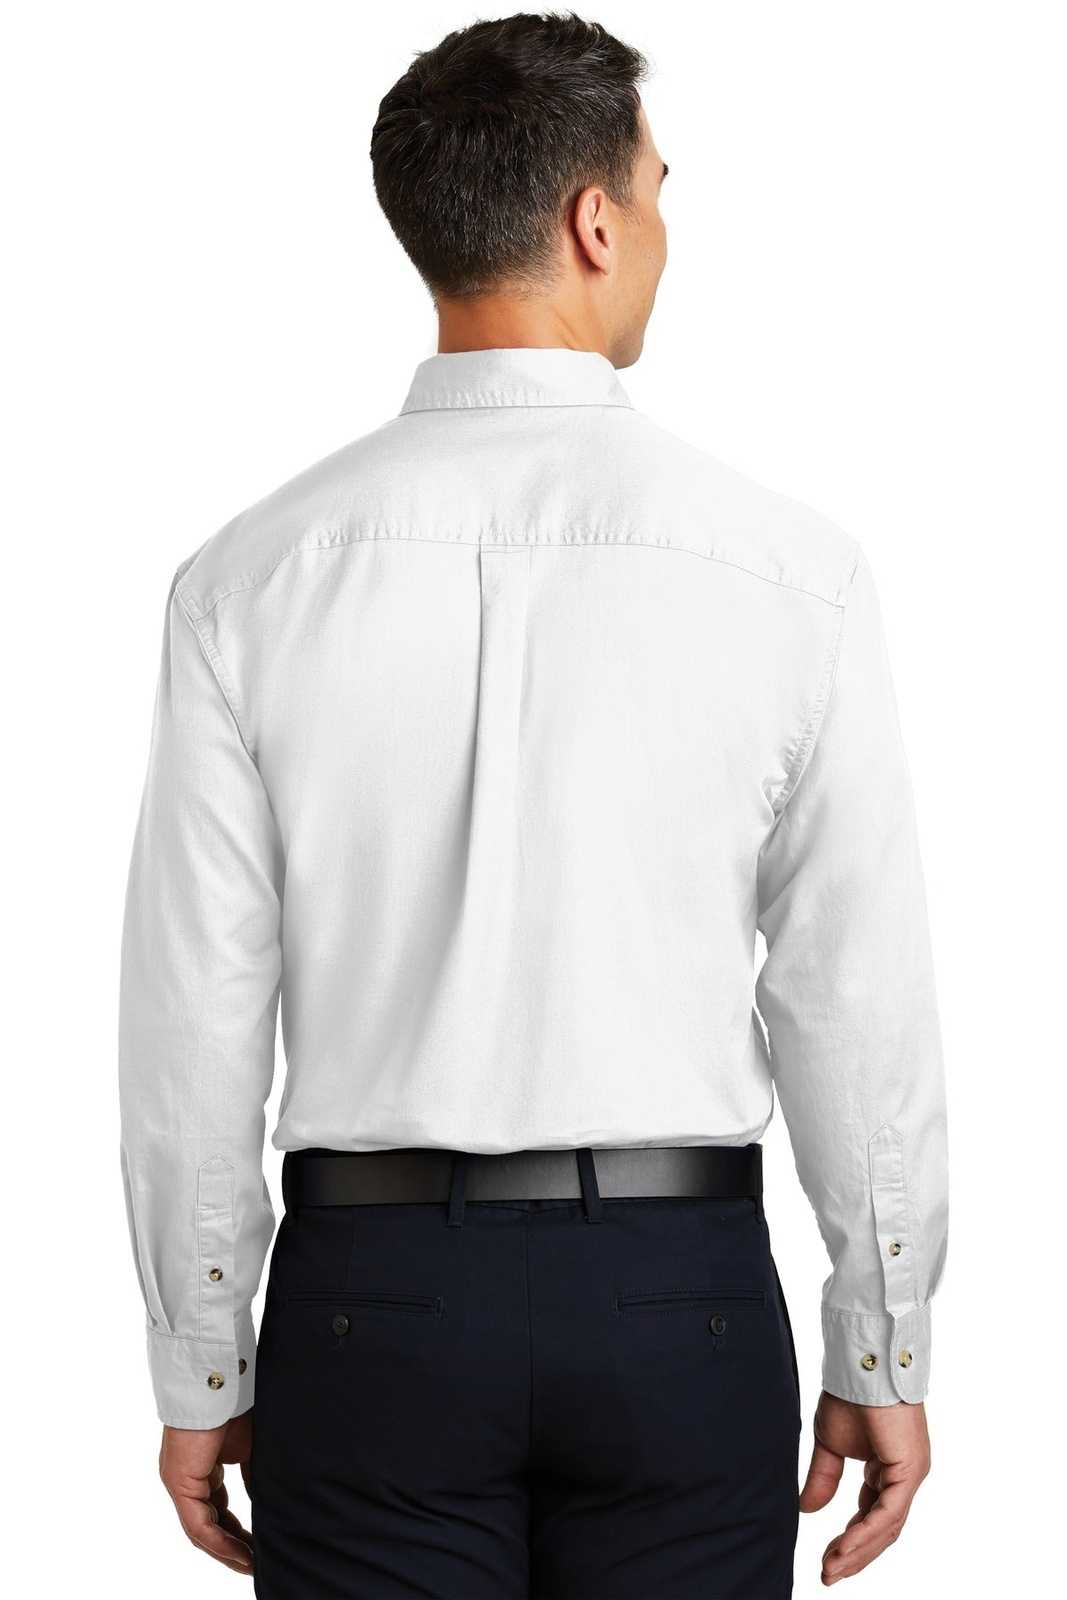 Port Authority S600T Long Sleeve Twill Shirt - White - HIT a Double - 2